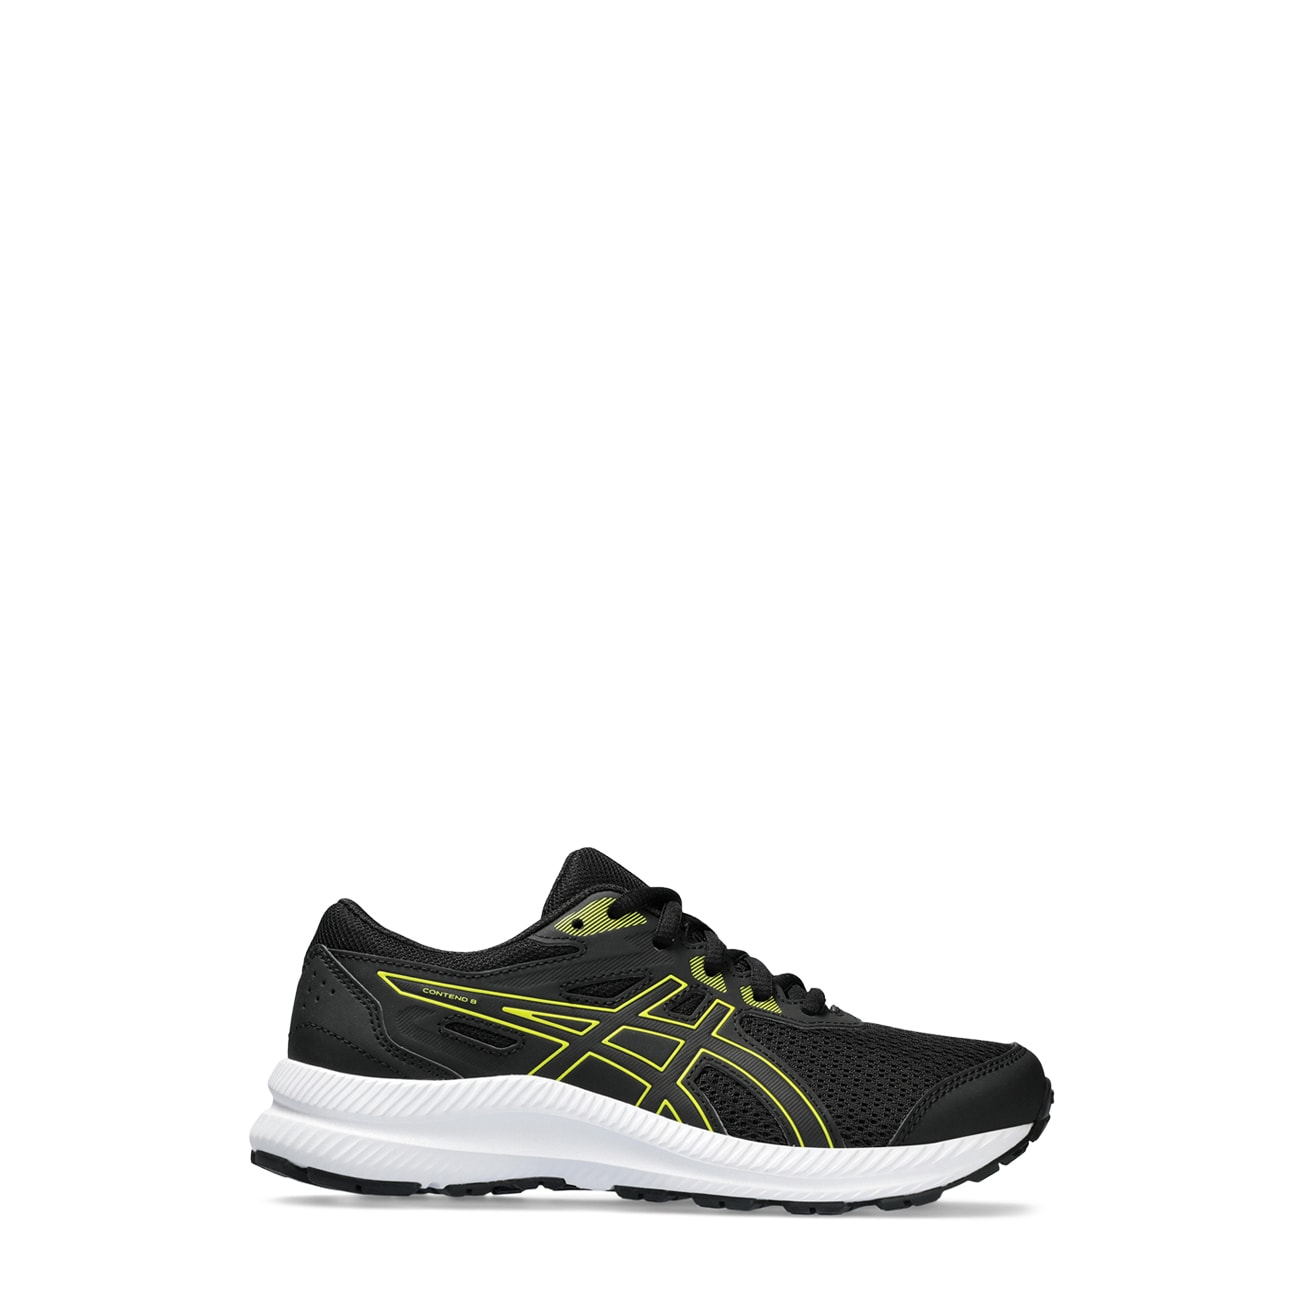 Youth Boys' Contend 8 Running Shoe